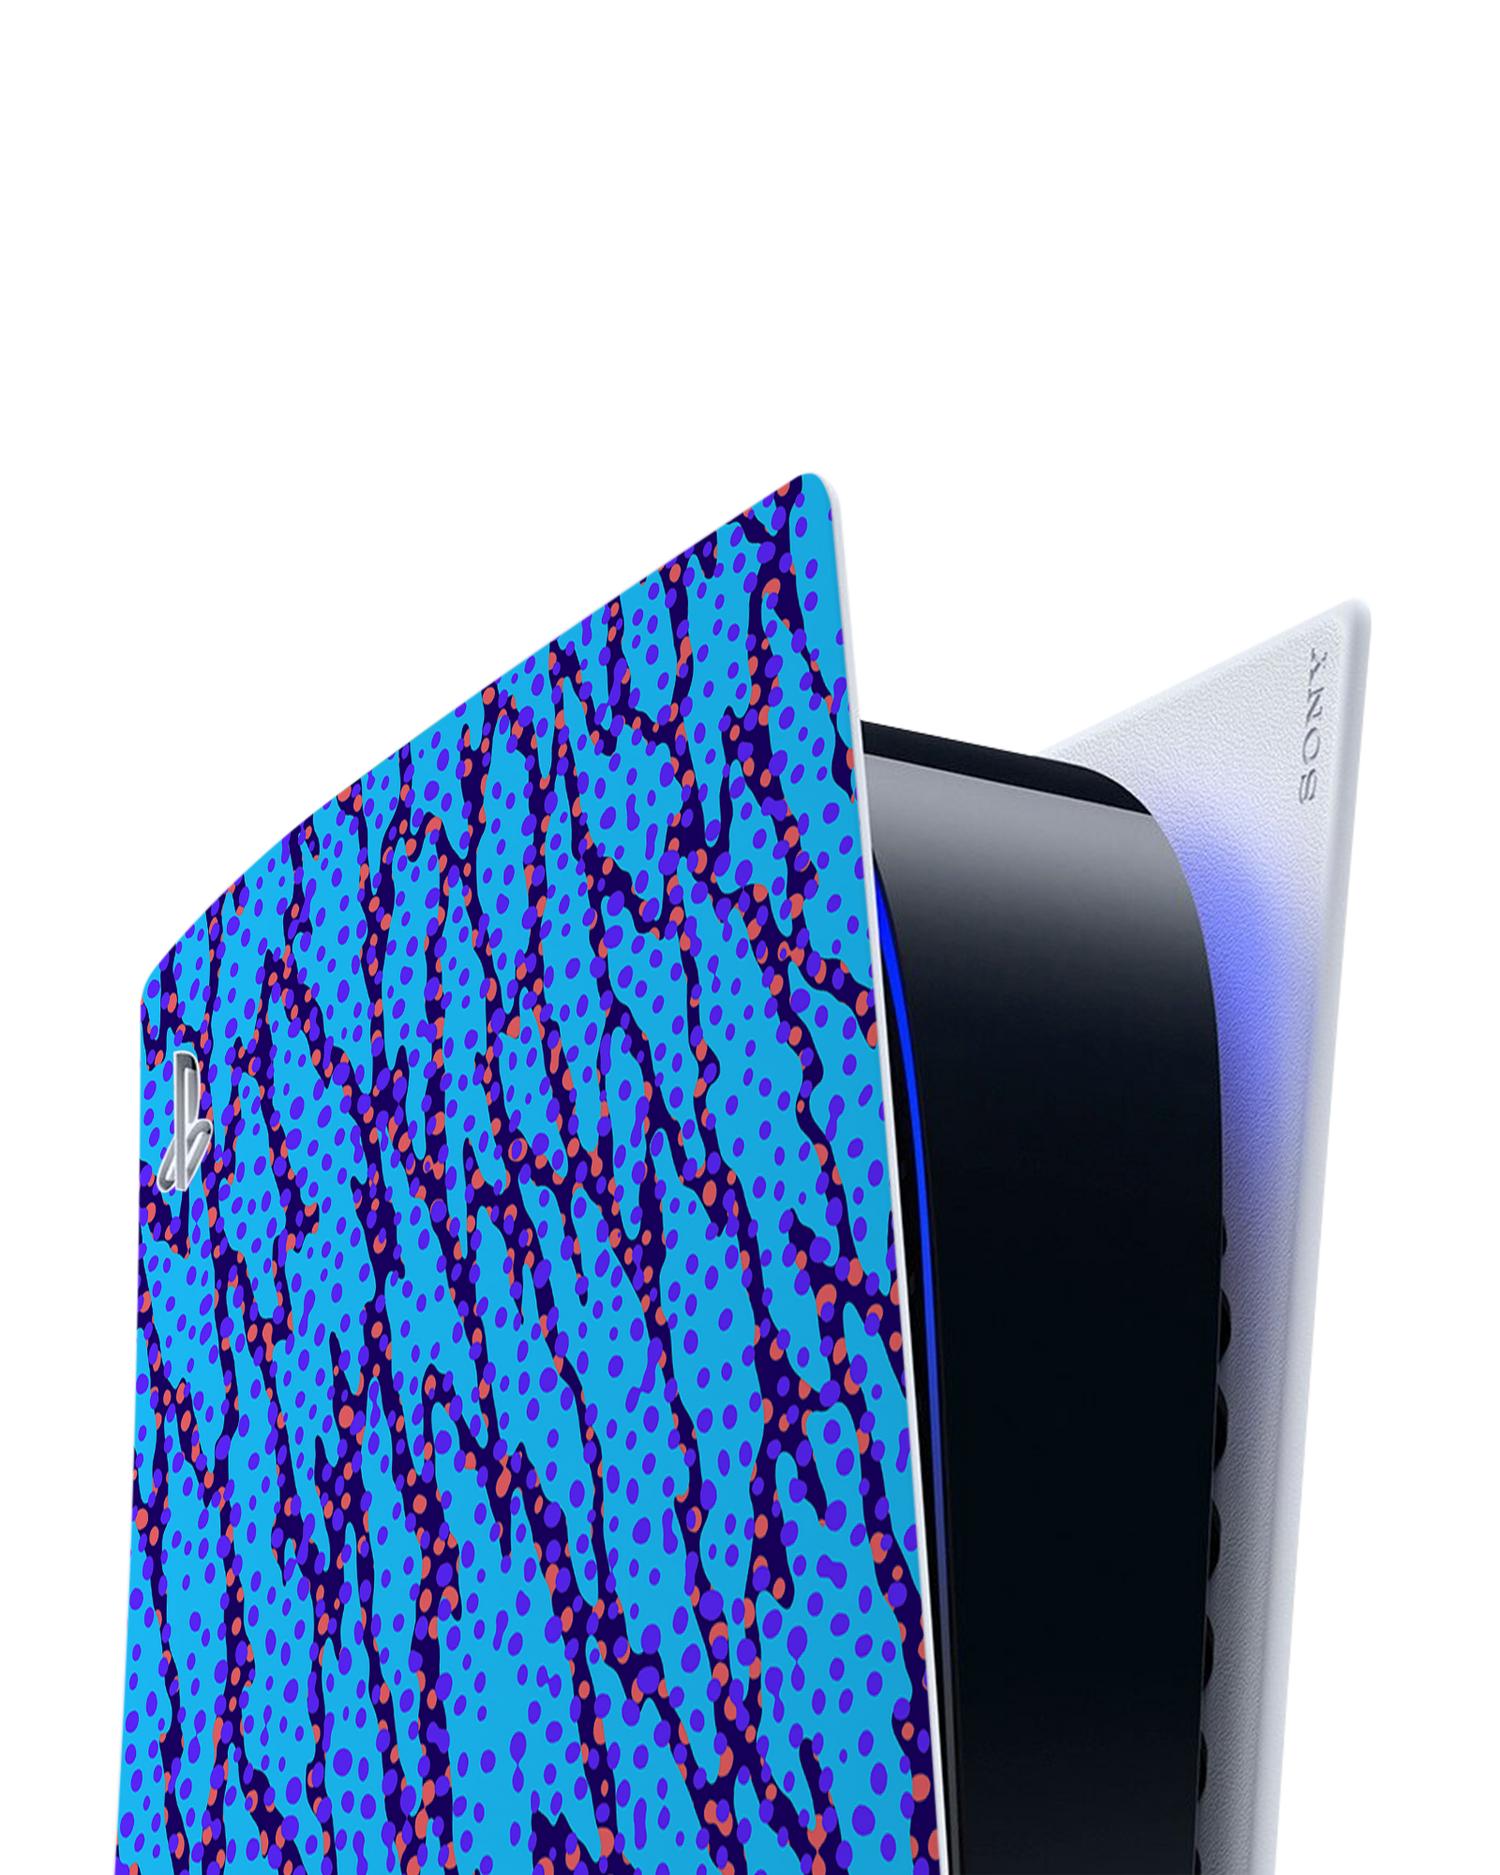 Electric Ocean Console Skin for Sony PlayStation 5: Detail shot